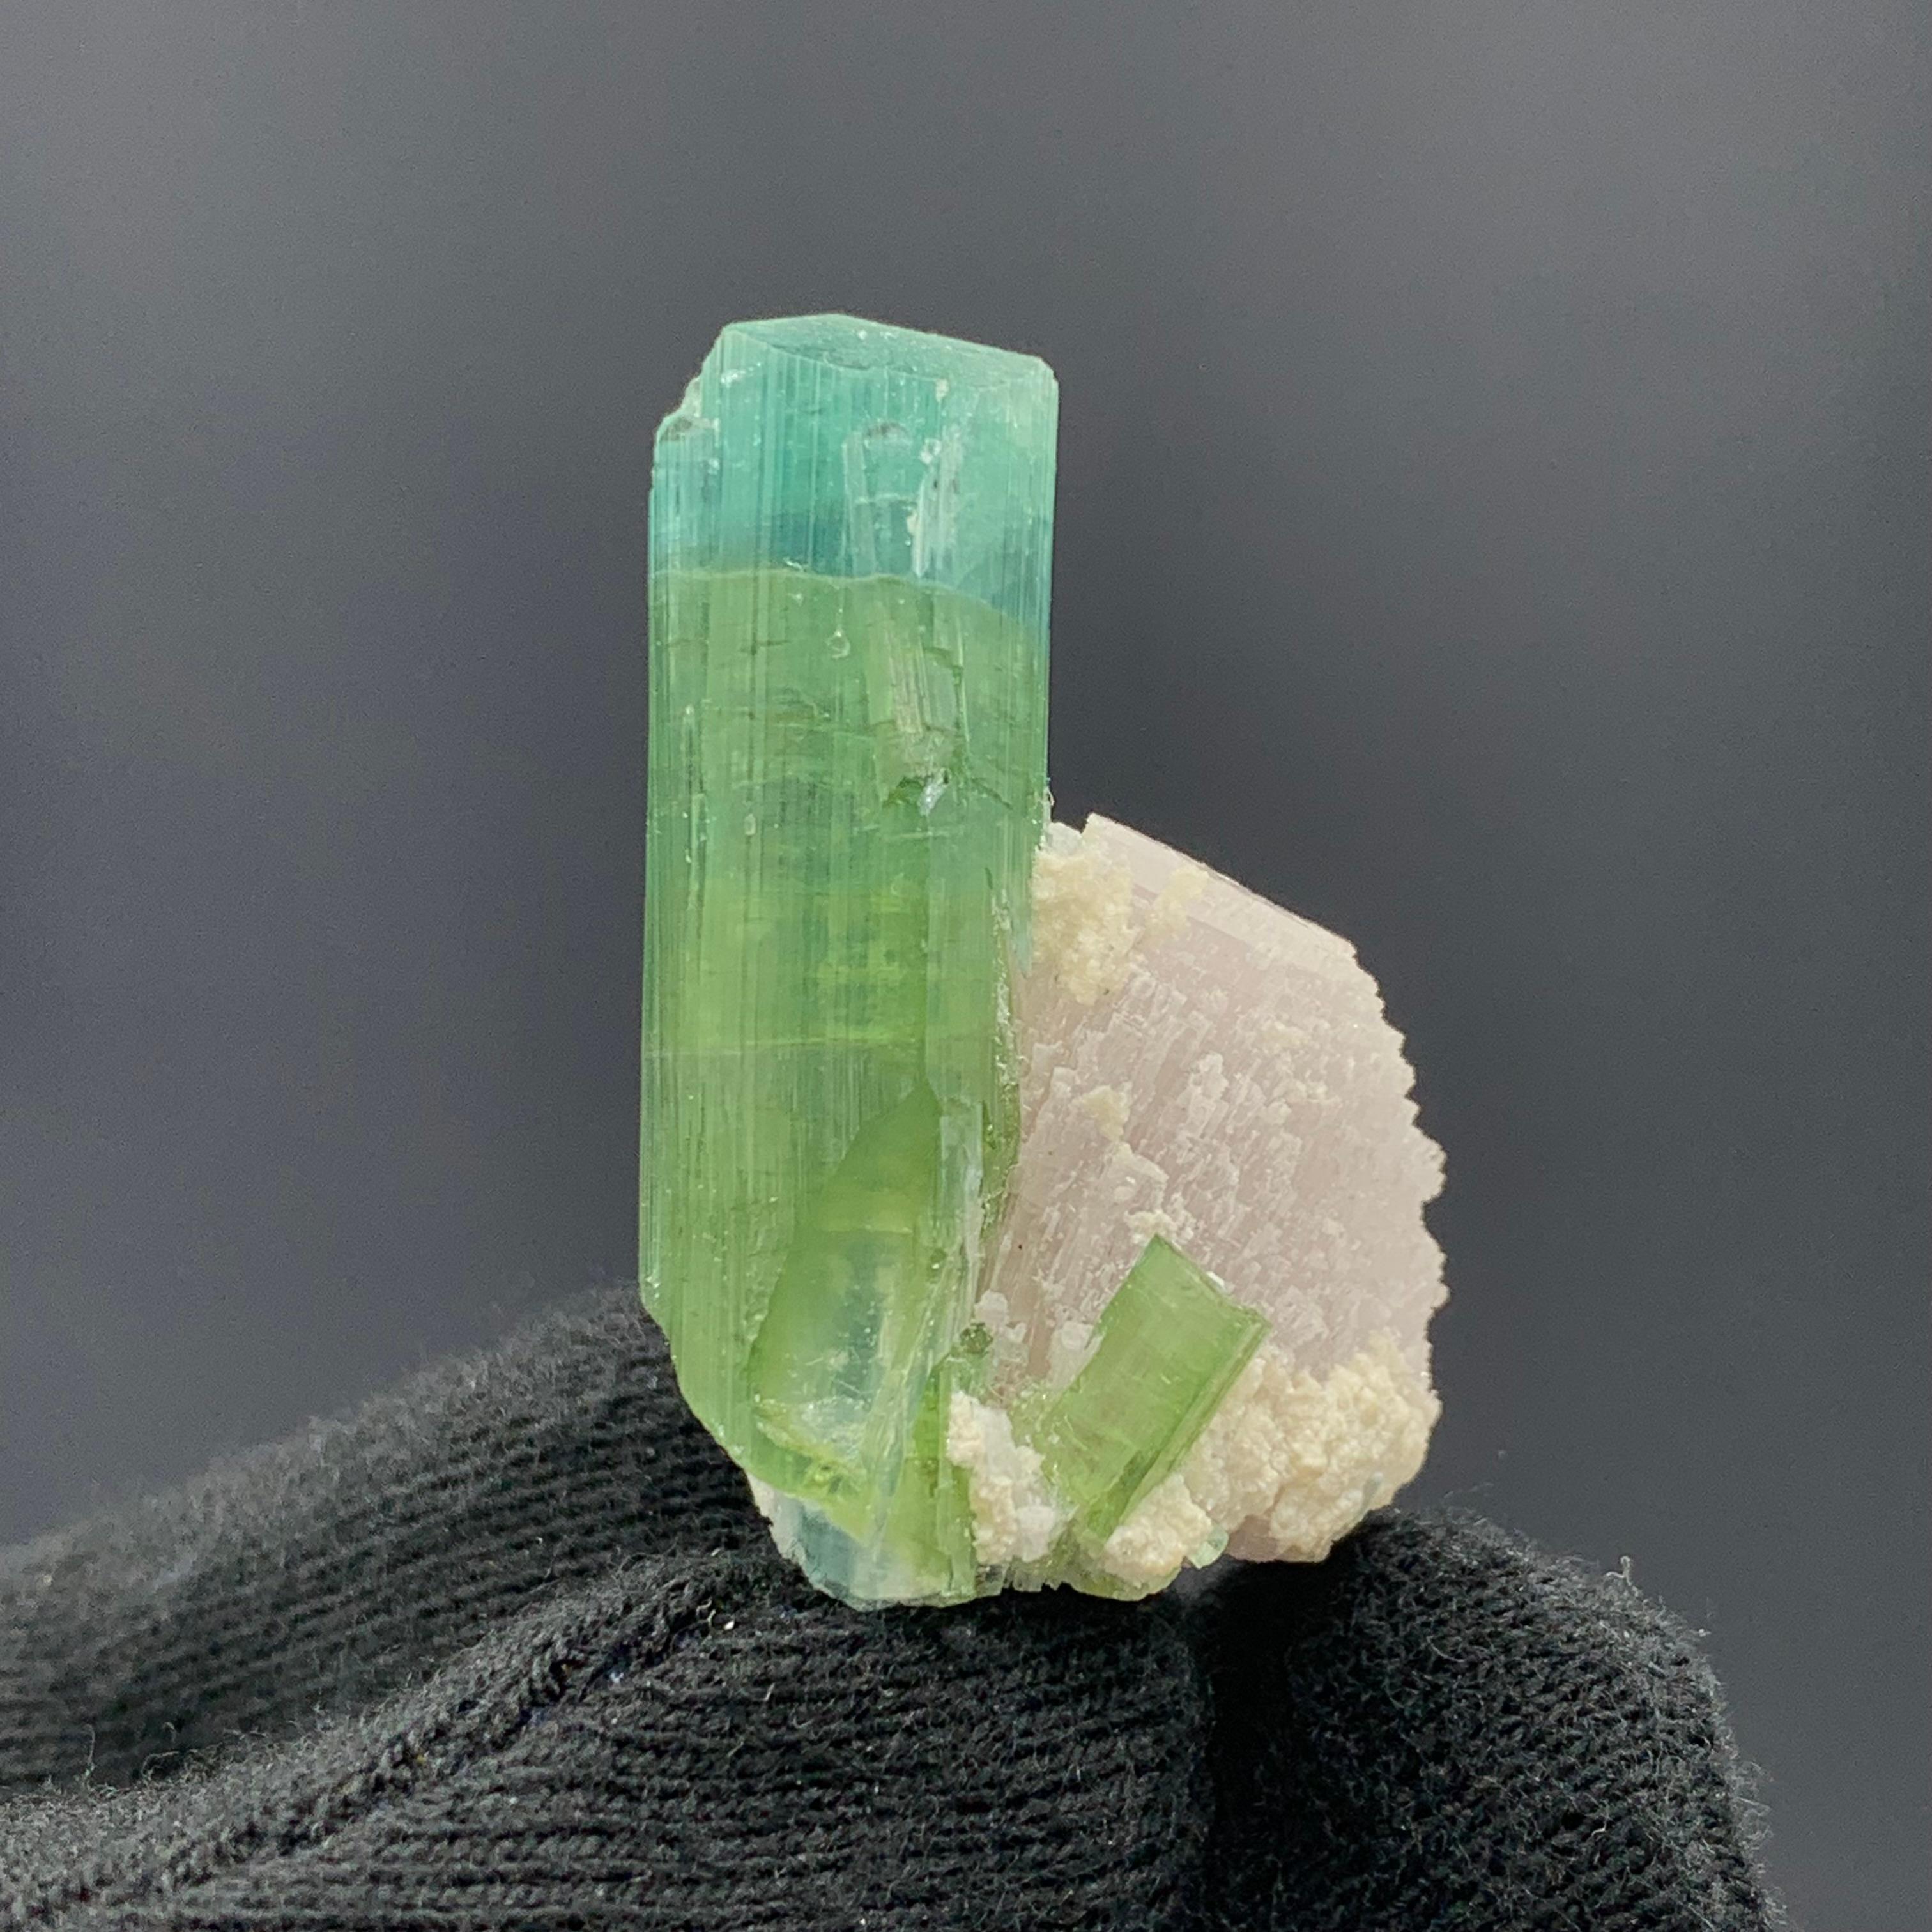 12.05 Gram Glamorous Bi Color Tourmaline Specimen From Kunar, Afghanistan 

Weight: 12.05 Gram 
Dimension: 3.4 x 1.7 x 1.6 Cm
Origin: kunar, Afghanistan 

Tourmaline is a crystalline silicate mineral group in which boron is compounded with elements